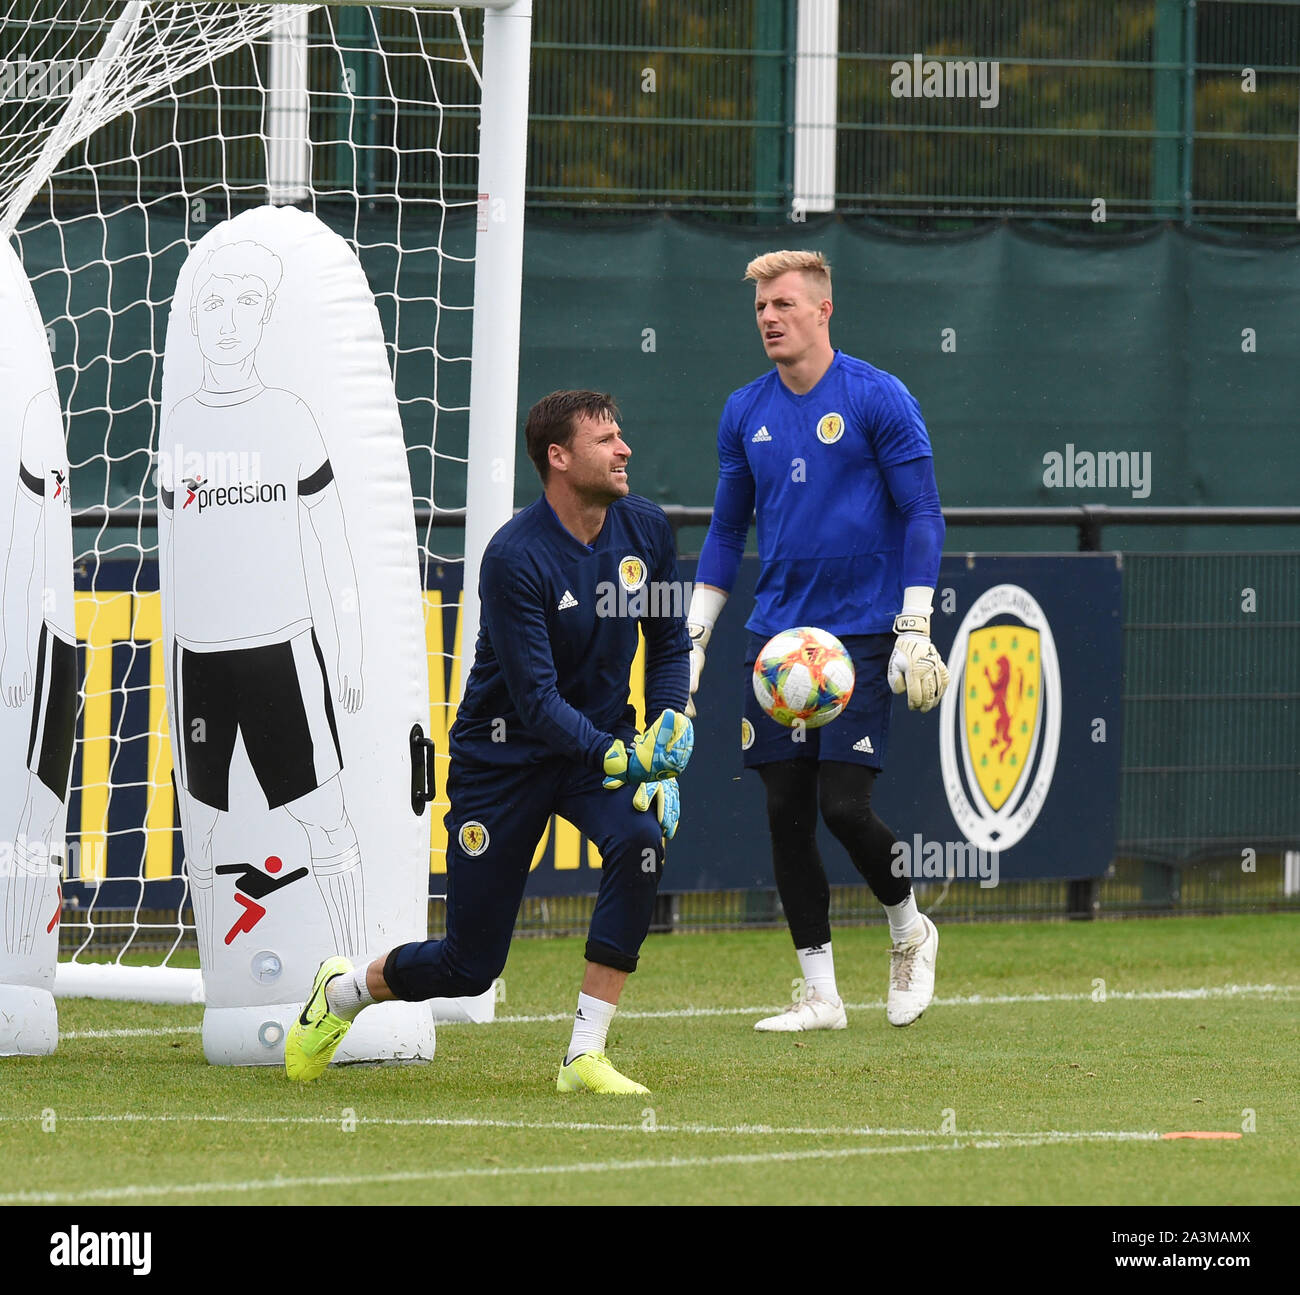 Edinburgh, Scotland, UK. 09th Oct, 2019. L/r Scotland goalkeepers David Marshall (Wigan Athletic) & Craig MacGillivray (Portsmouth) during Training session at the Oriam, Riccarton, Edinburgh before flying out to Moscow for UEFA EURO 2020 Qualifier fixture against Russia at the Luzhniki Stadium Thursday 10th Oct 19. Credit: eric mccowat/Alamy Live News Stock Photo